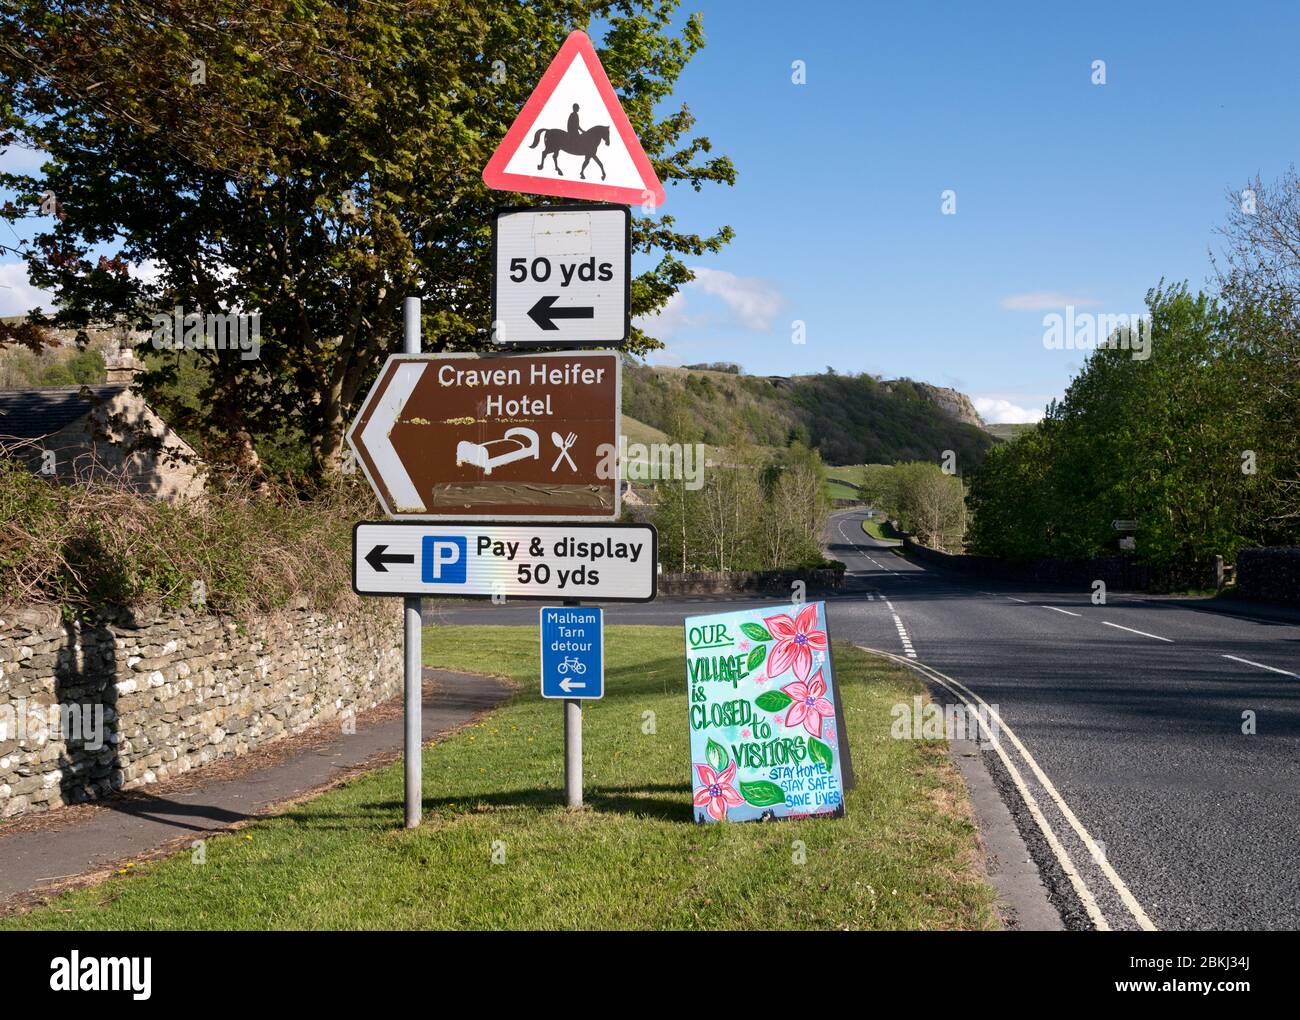 Stainforth, North Yorkshire, UK. 4th May 2020. Covid-19 lockdown in the countryside. Sign saying 'Our Village is closed to visitors. Stay at Home, Stay Safe, Save Lives'. Stainforth, Yorkshire Dales National Park, UK. Credit: John Bentley/Alamy Live News Stock Photo